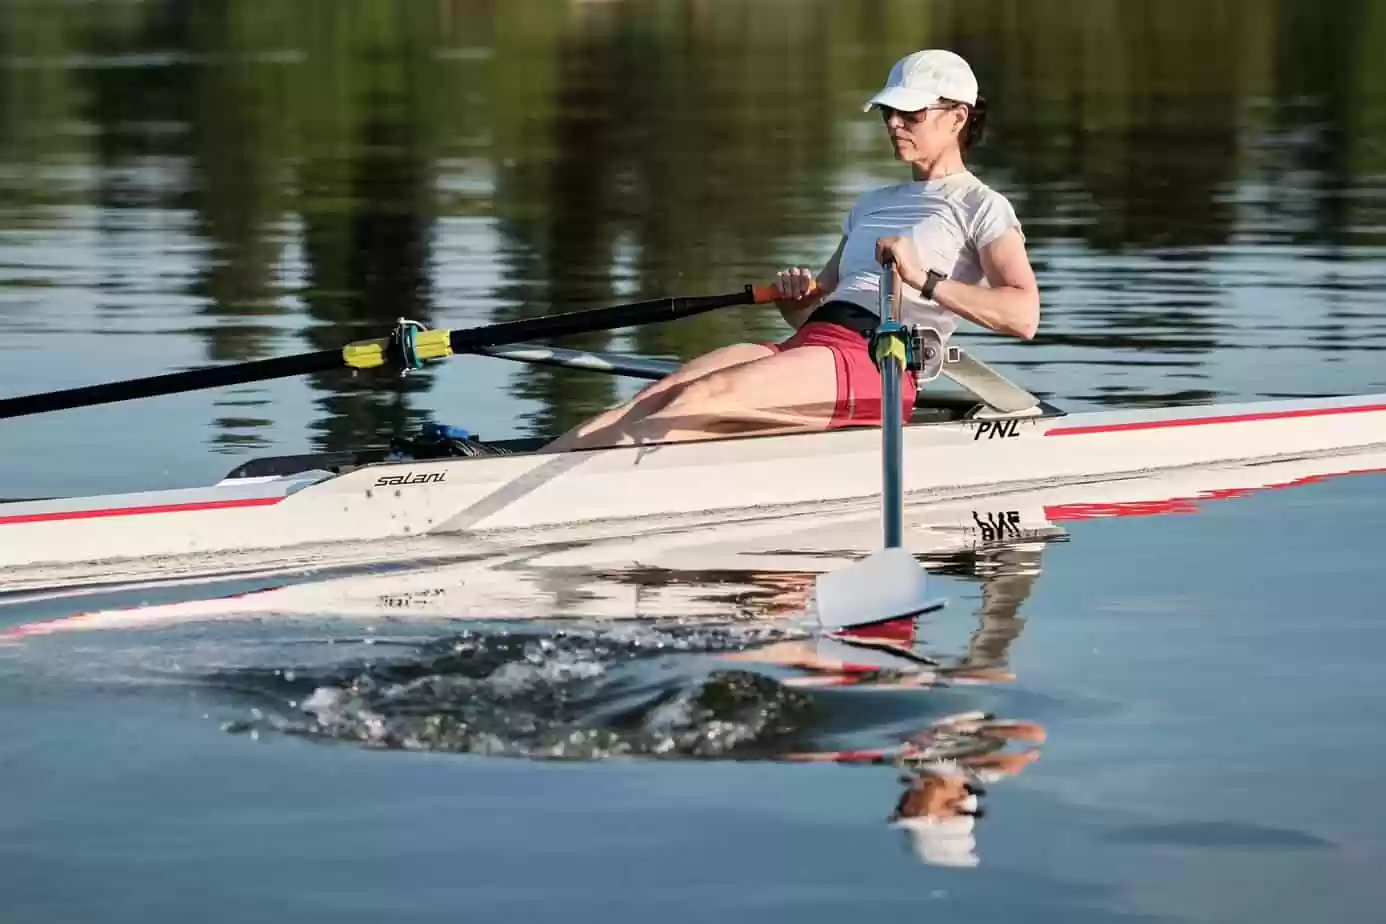 Slnava Piestany Rowing Club - Rowing on Water Female Single Scull Rower